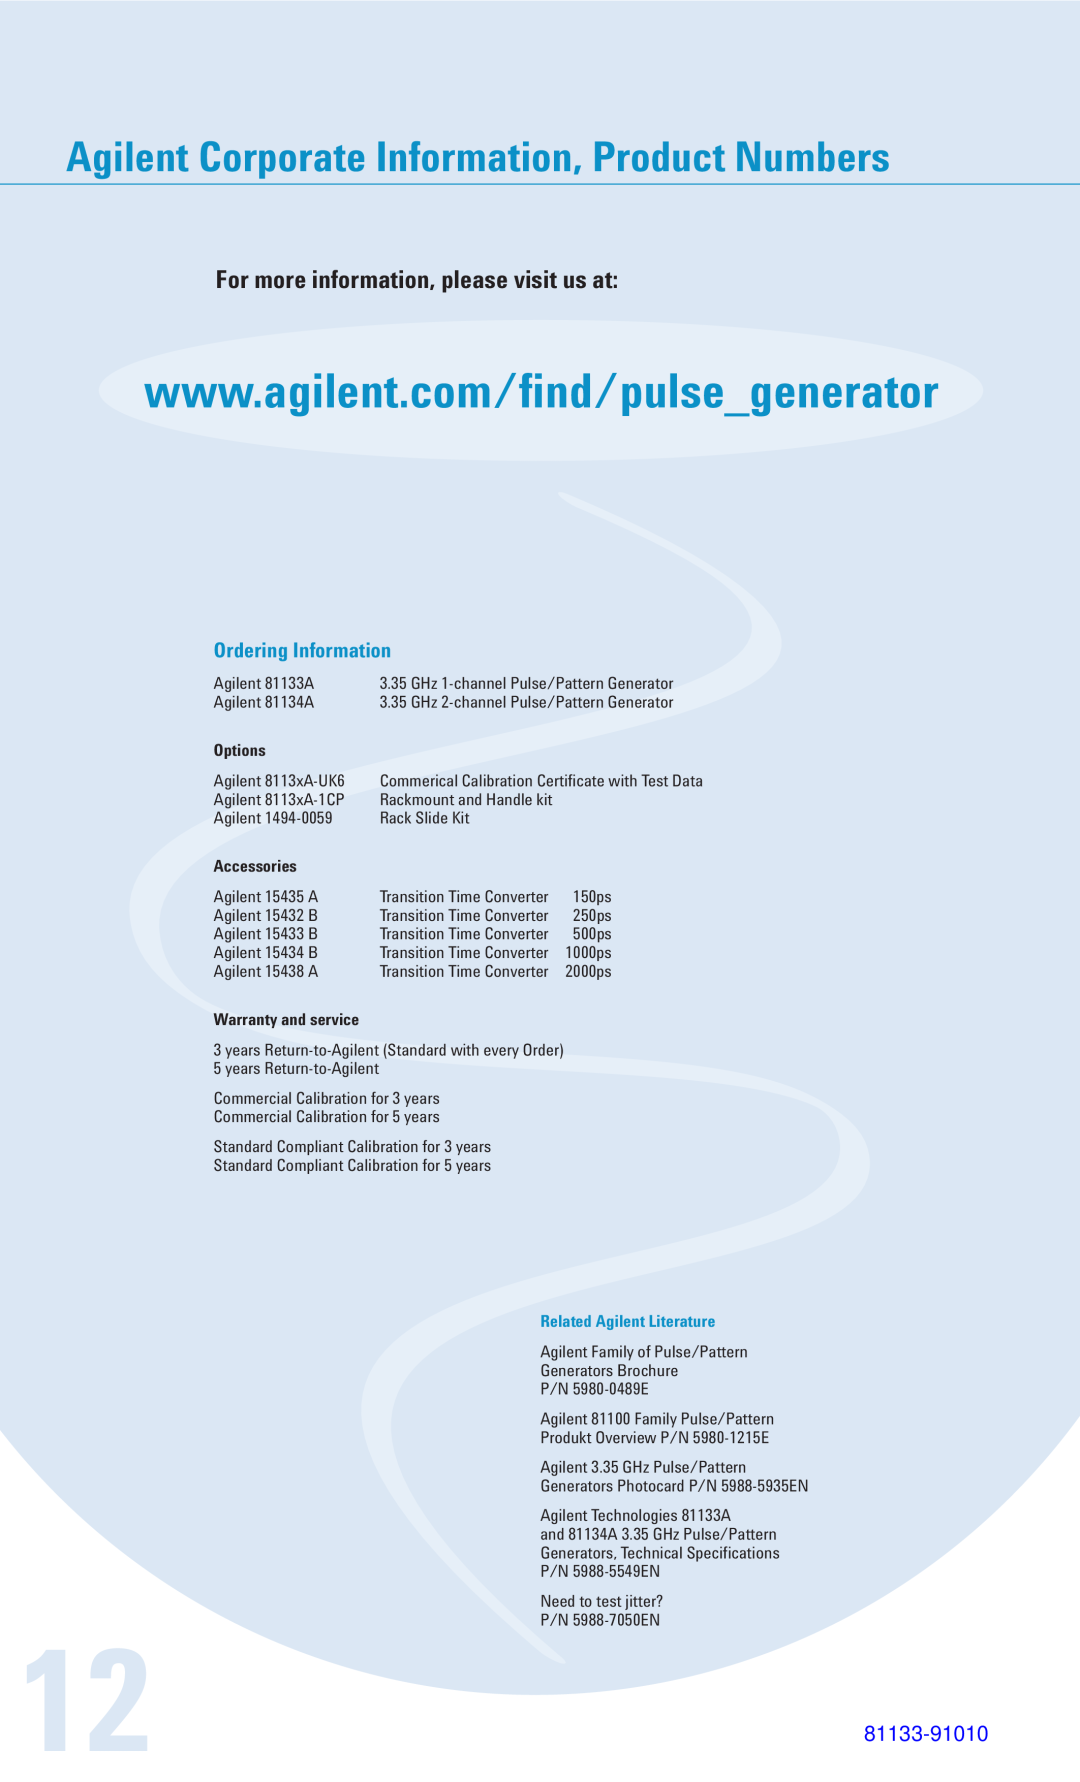 Agilent Technologies 81134A Agilent Corporate Information, Product Numbers, For more information, please visit us at 